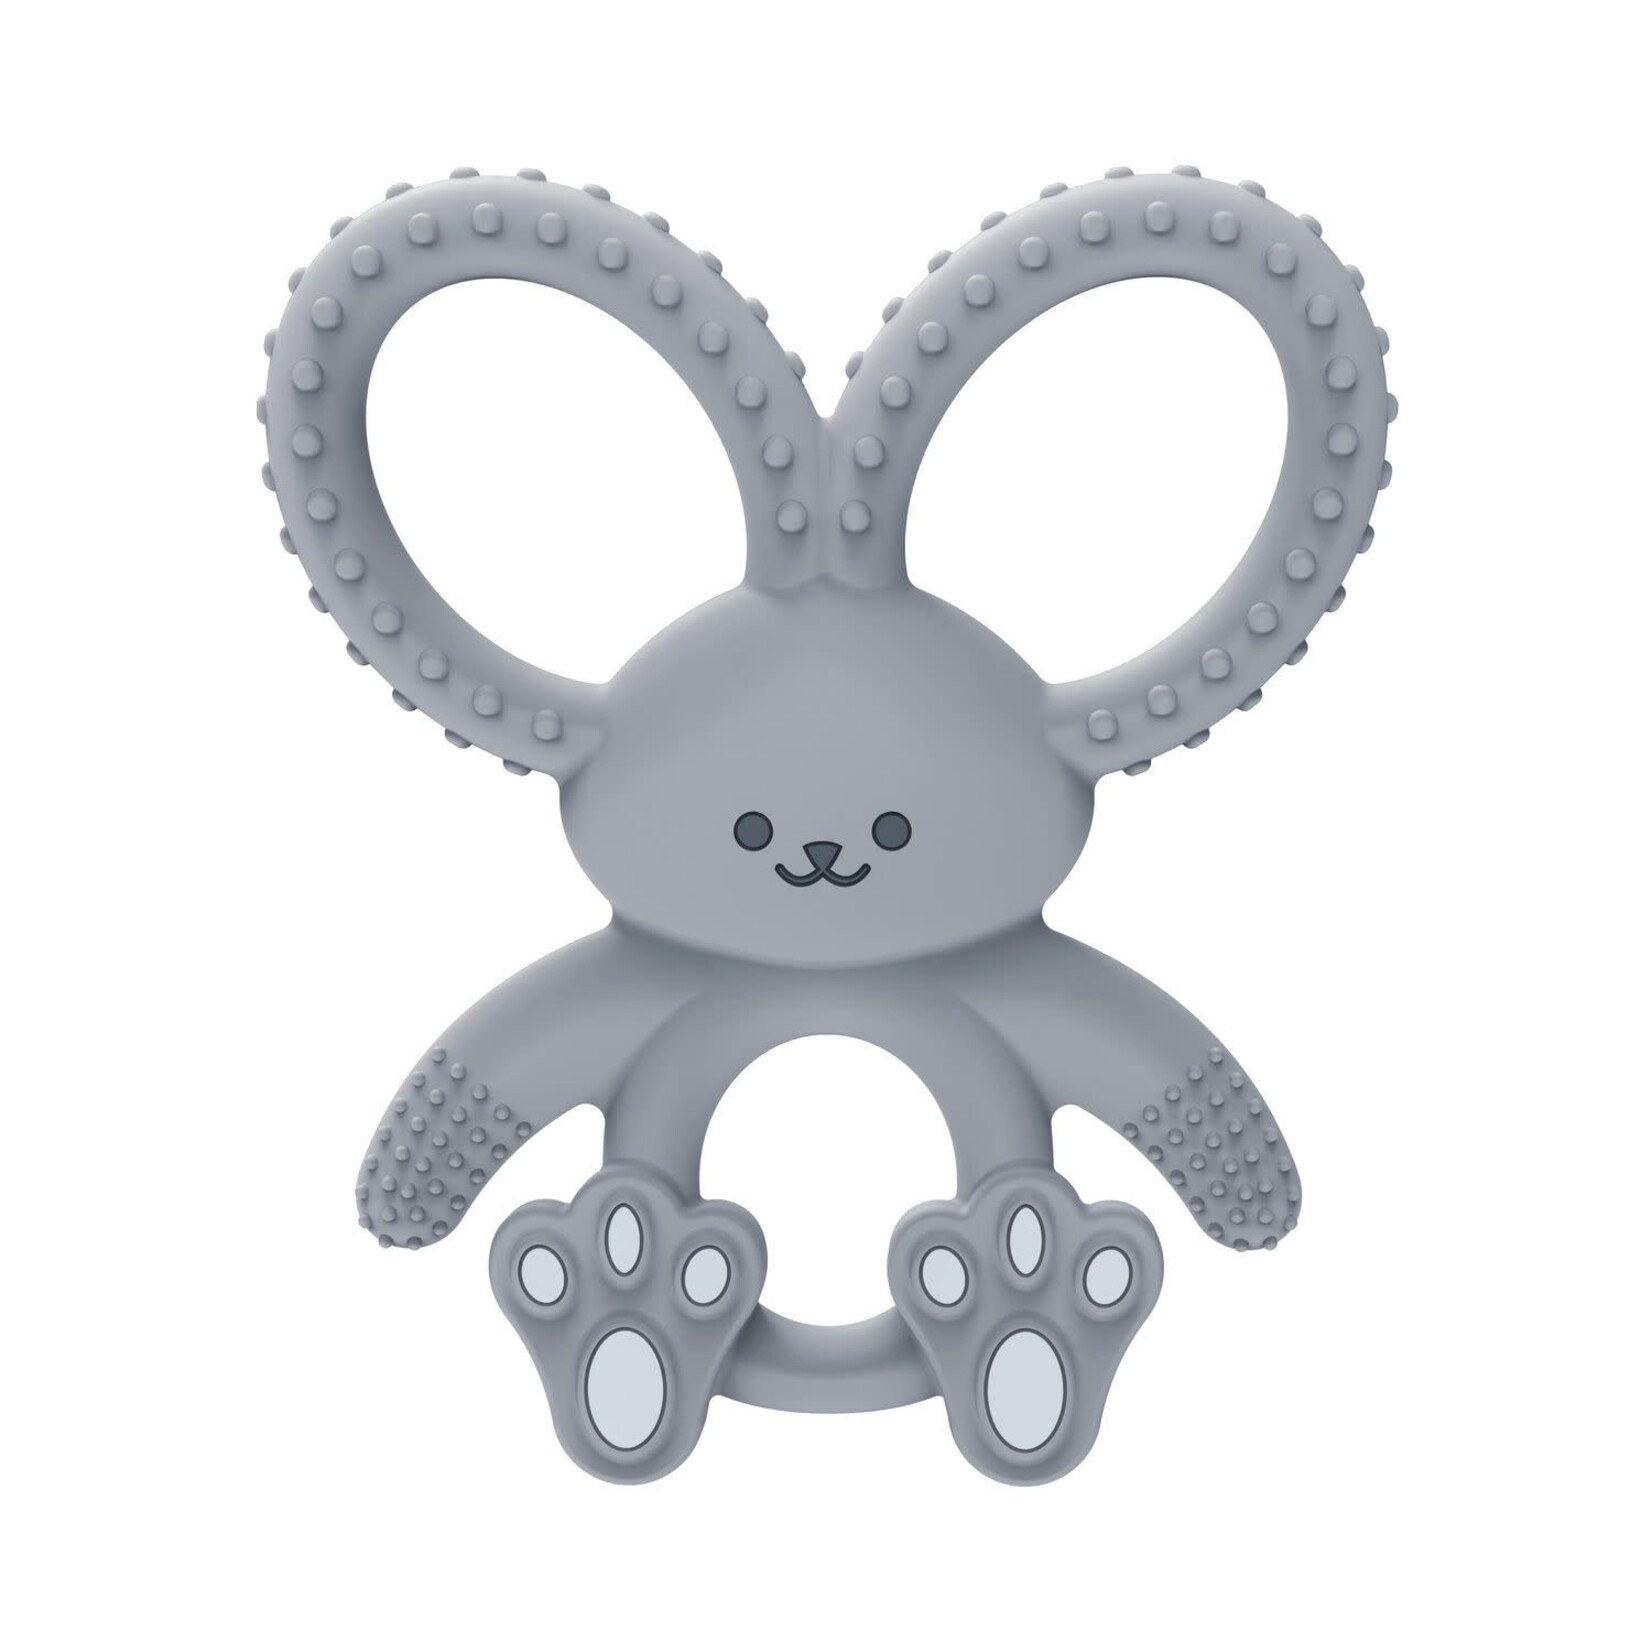 Dr Browns DR BROWNS LONG LIMBED BUNNY SILICONE TEETHERS